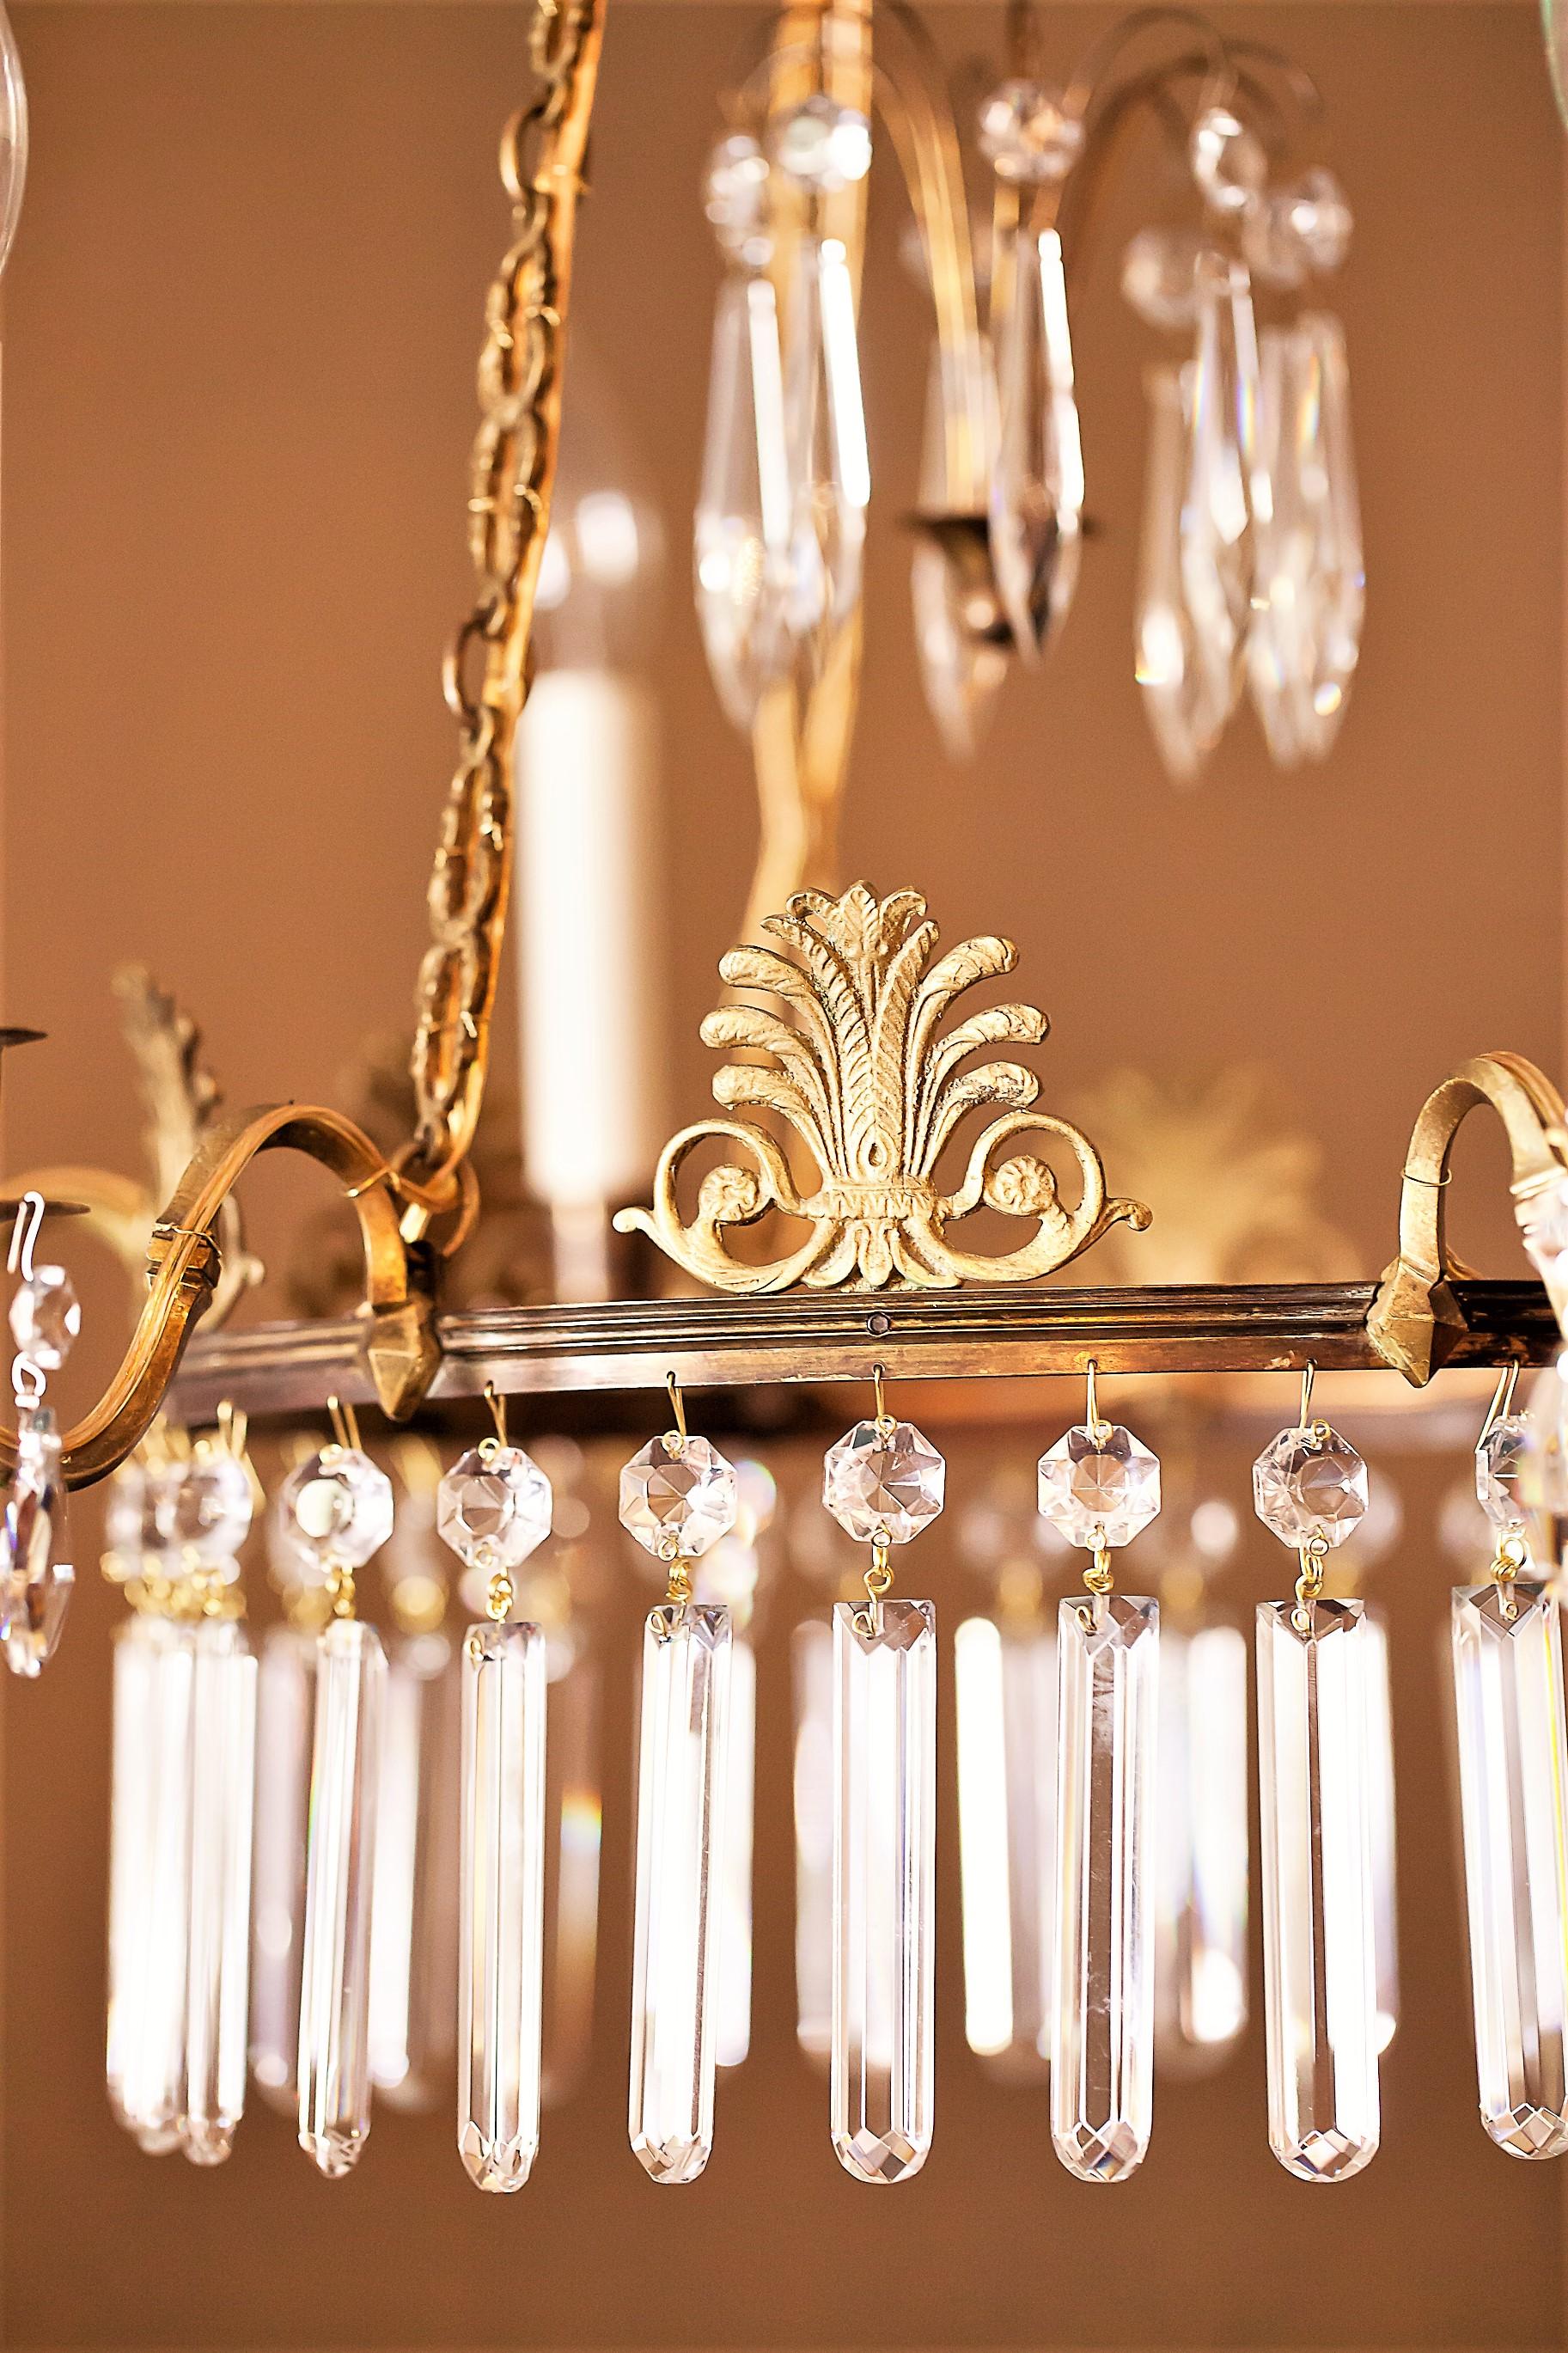 6-Light Neoclassical Style Brass and Crystal Chandelier, Sweden, circa 1890 For Sale 2